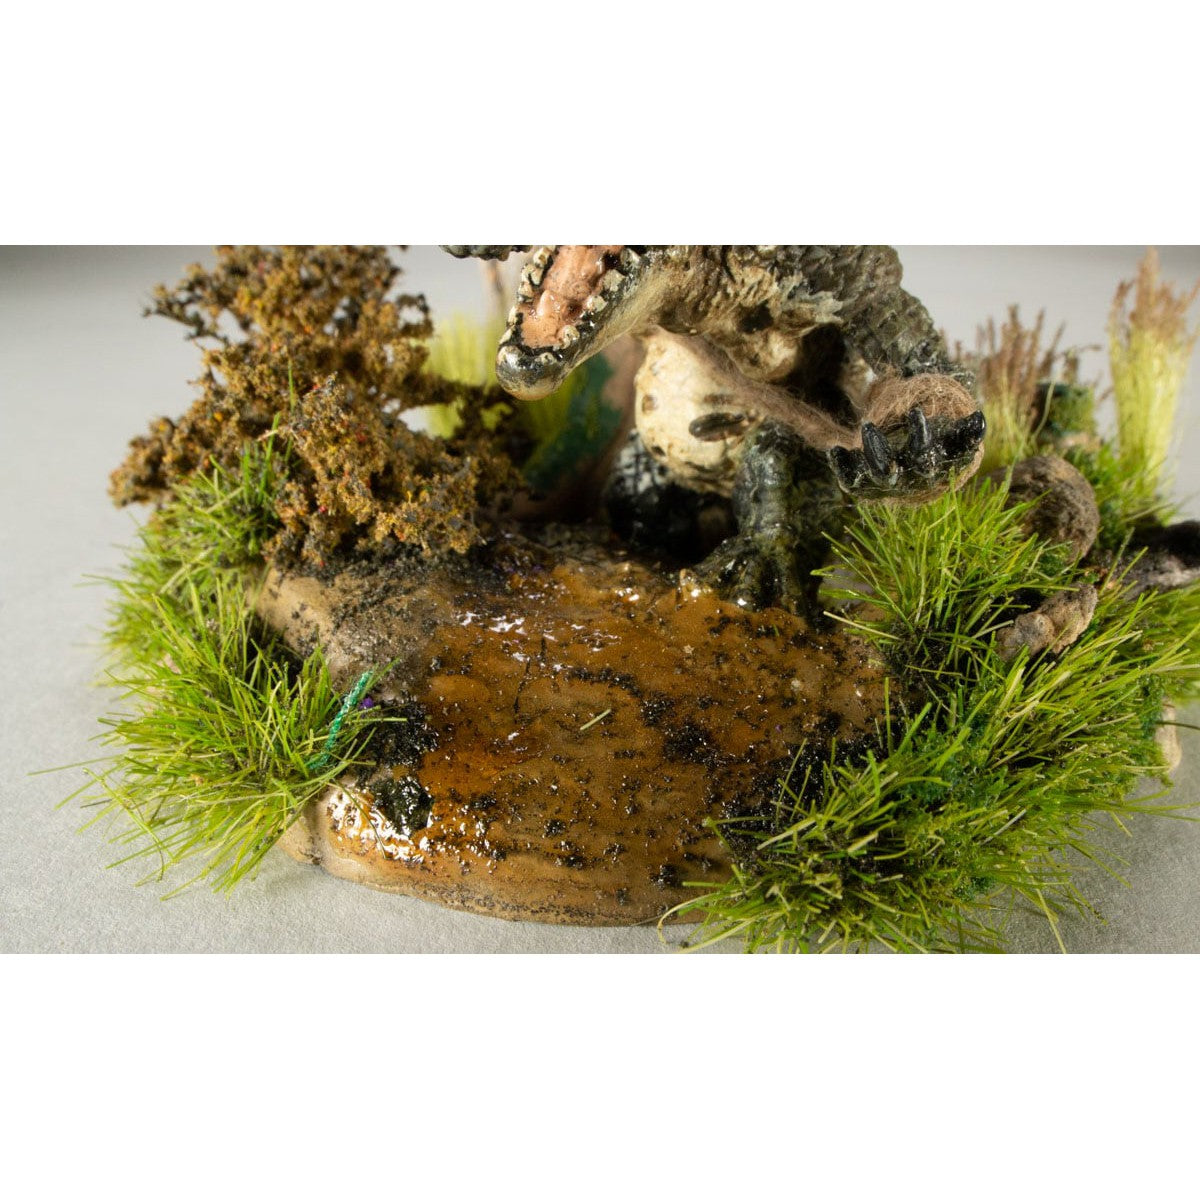 Base Paint - Green - Green Base Paint is most commonly used for initial color before applying lush vegetation on your terrain feature, miniature base or gaming board